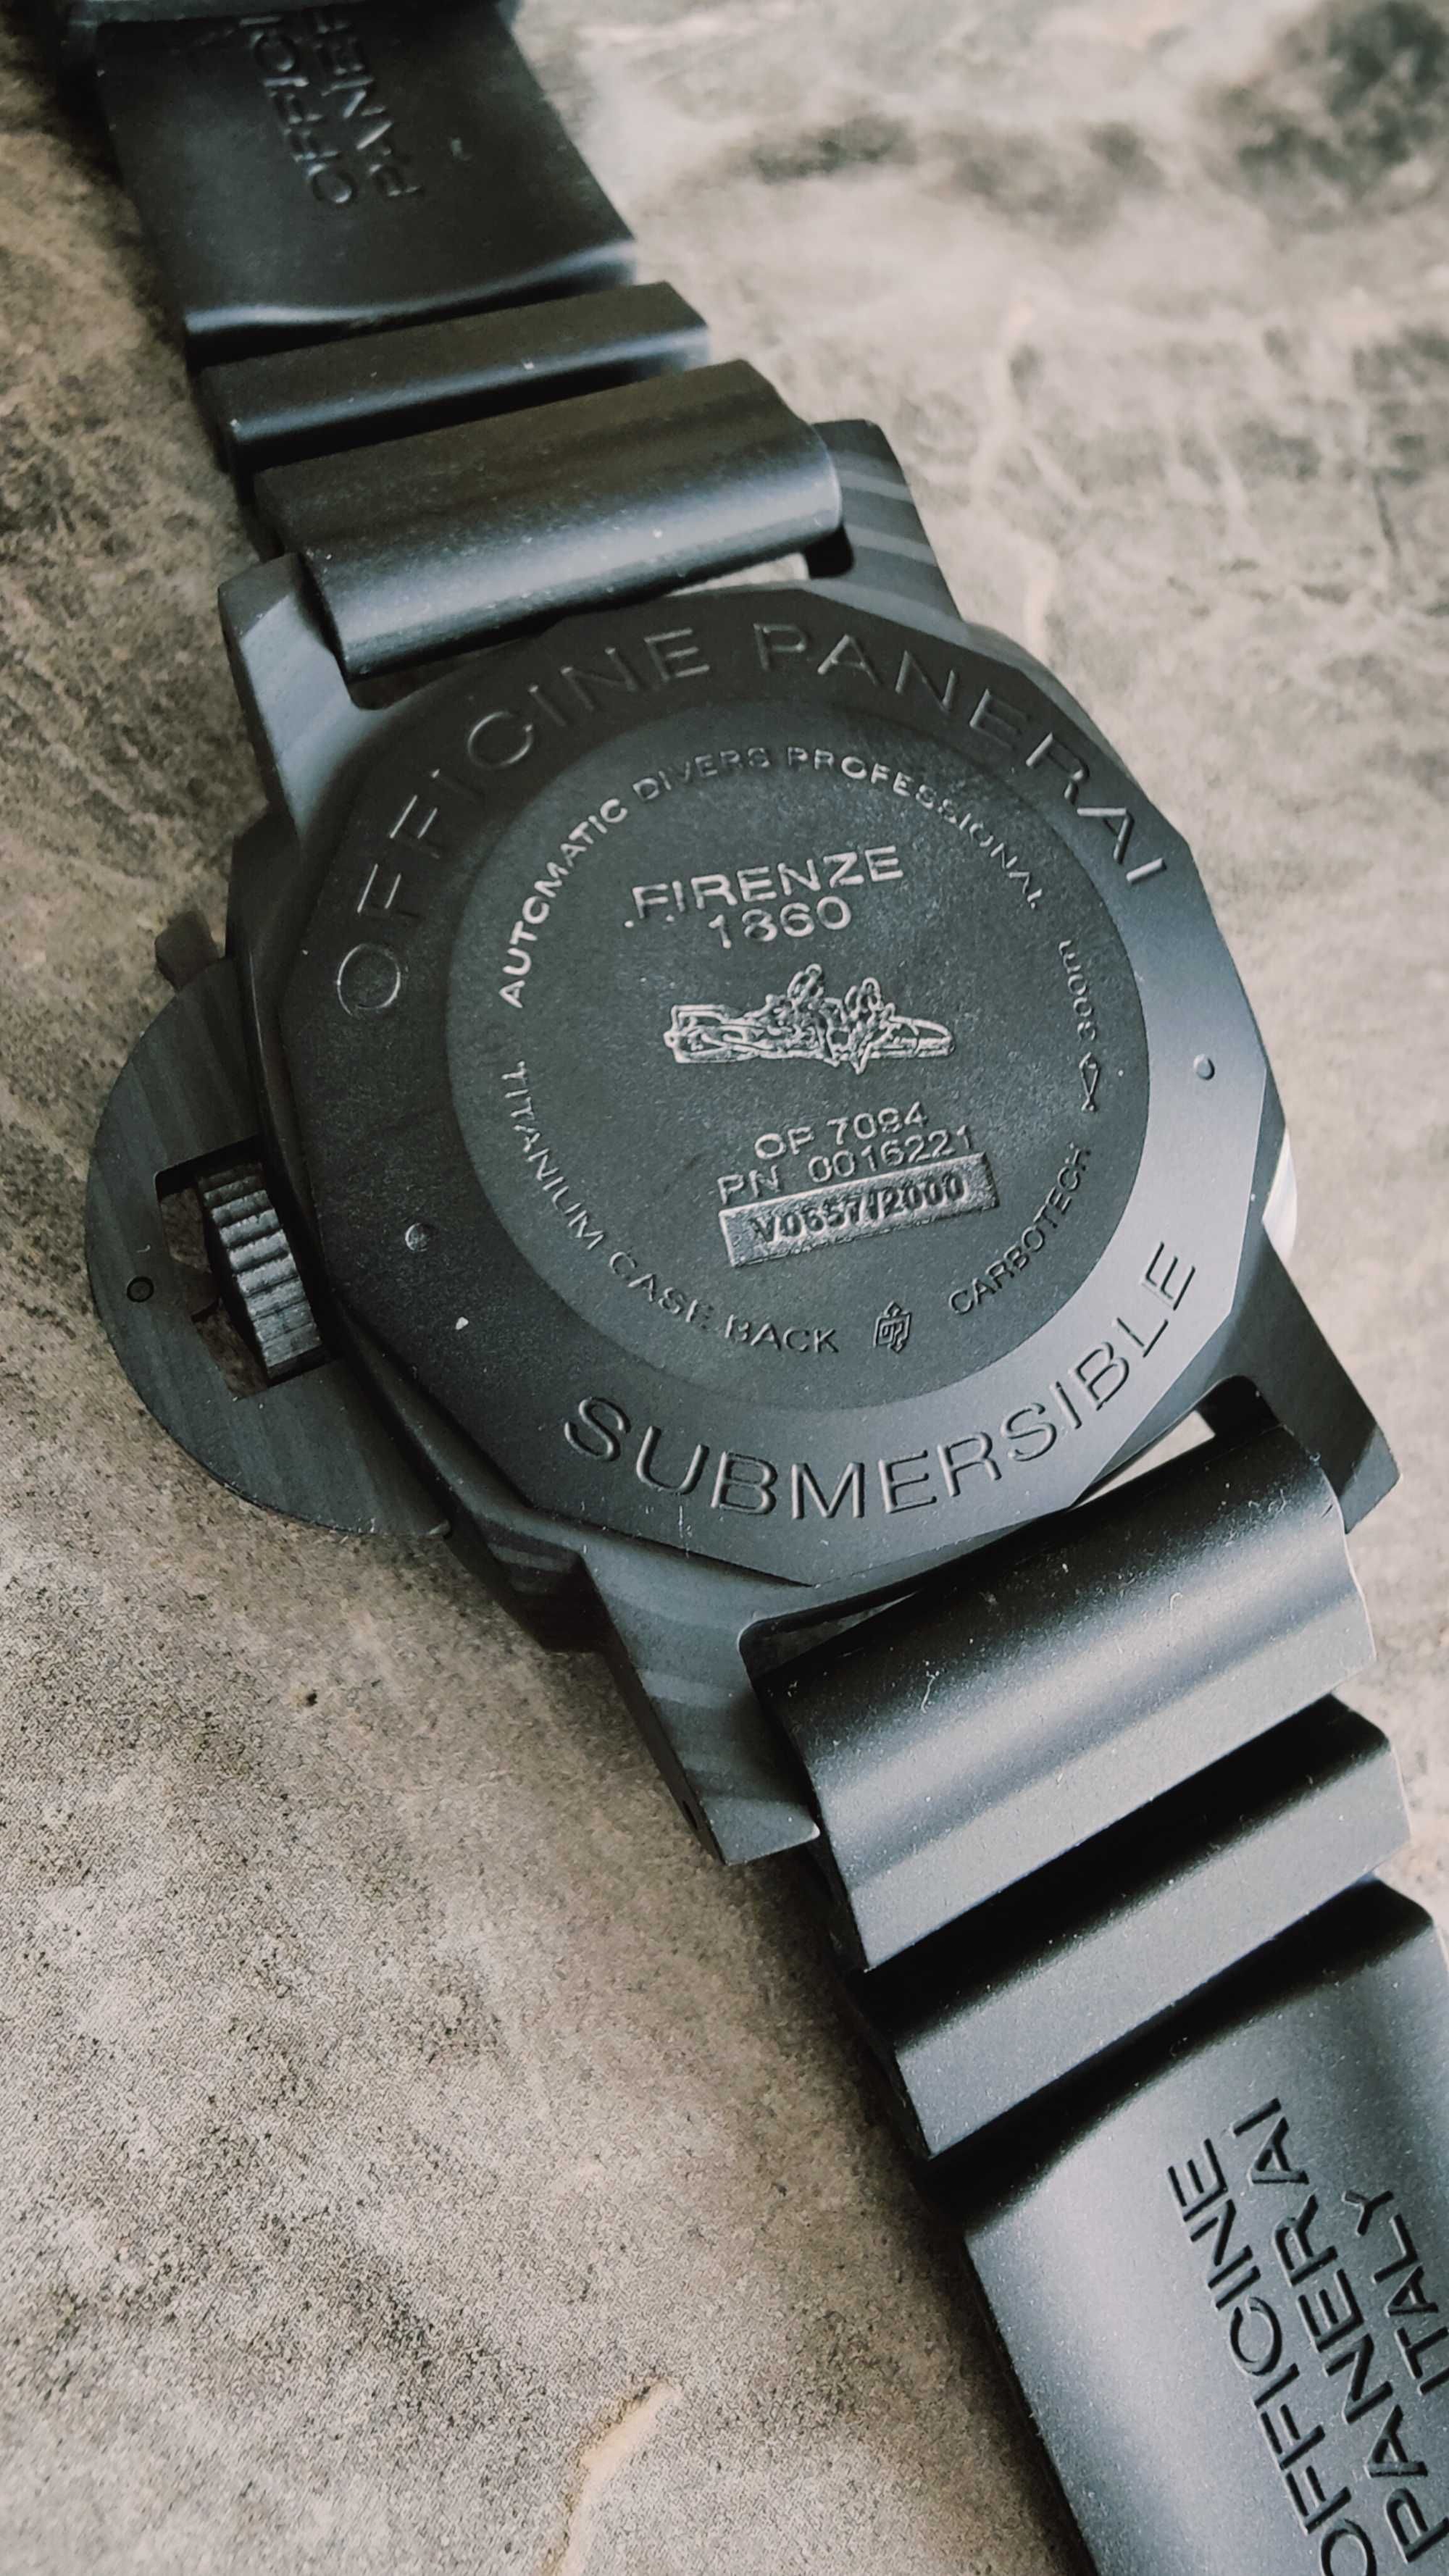 Panerai Submersible Carbotech, PAM 1616, 47 mm